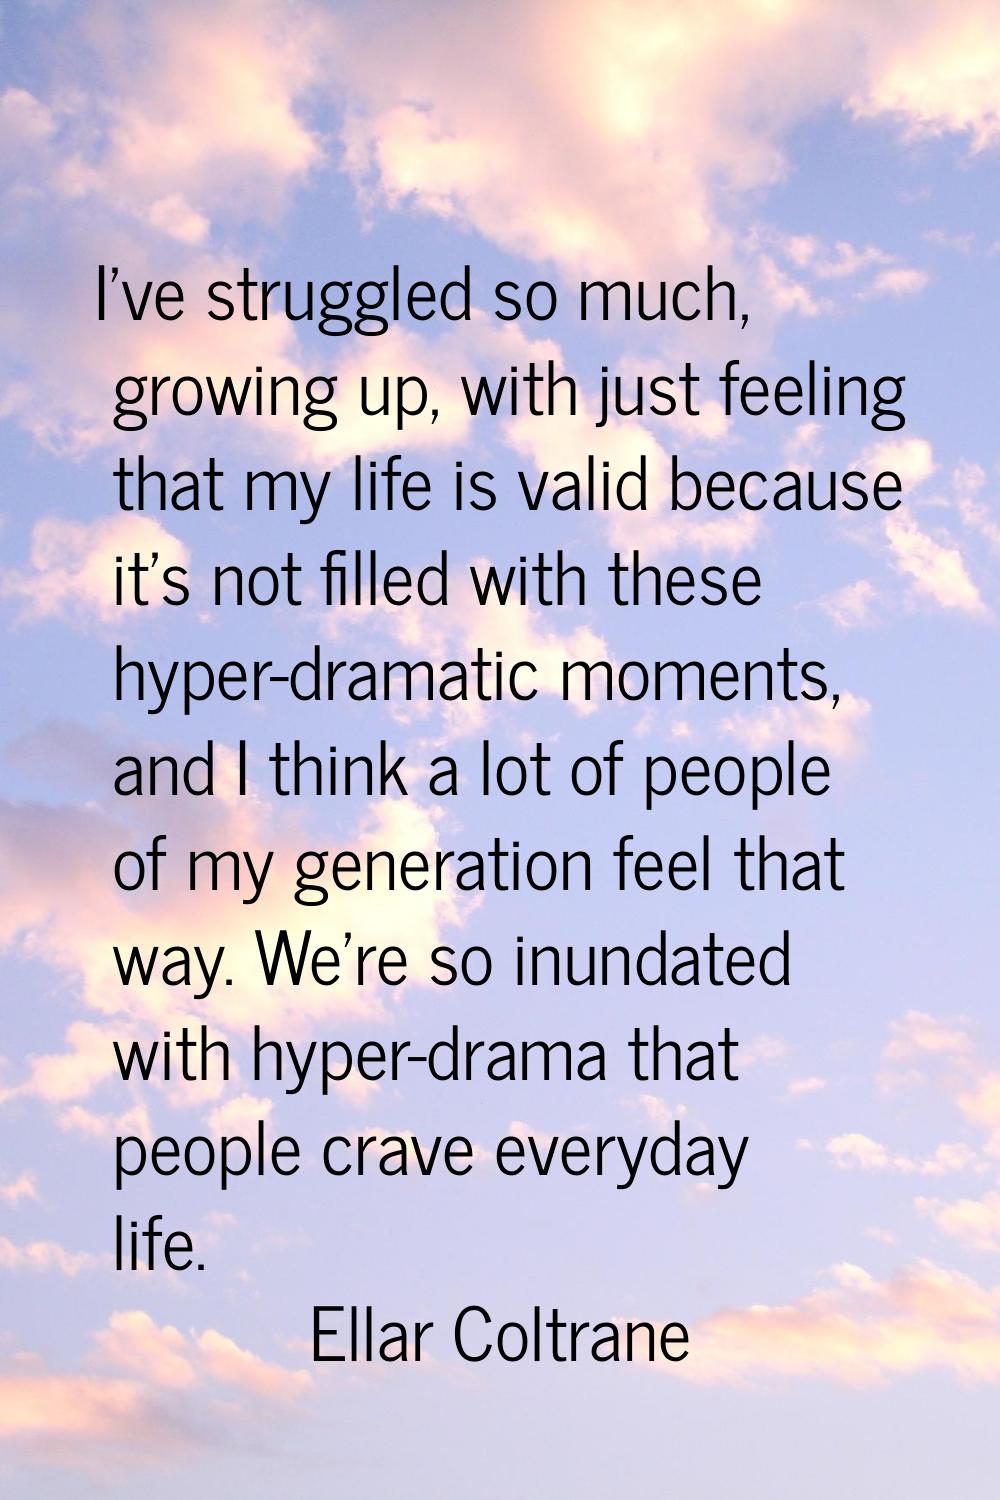 I've struggled so much, growing up, with just feeling that my life is valid because it's not filled